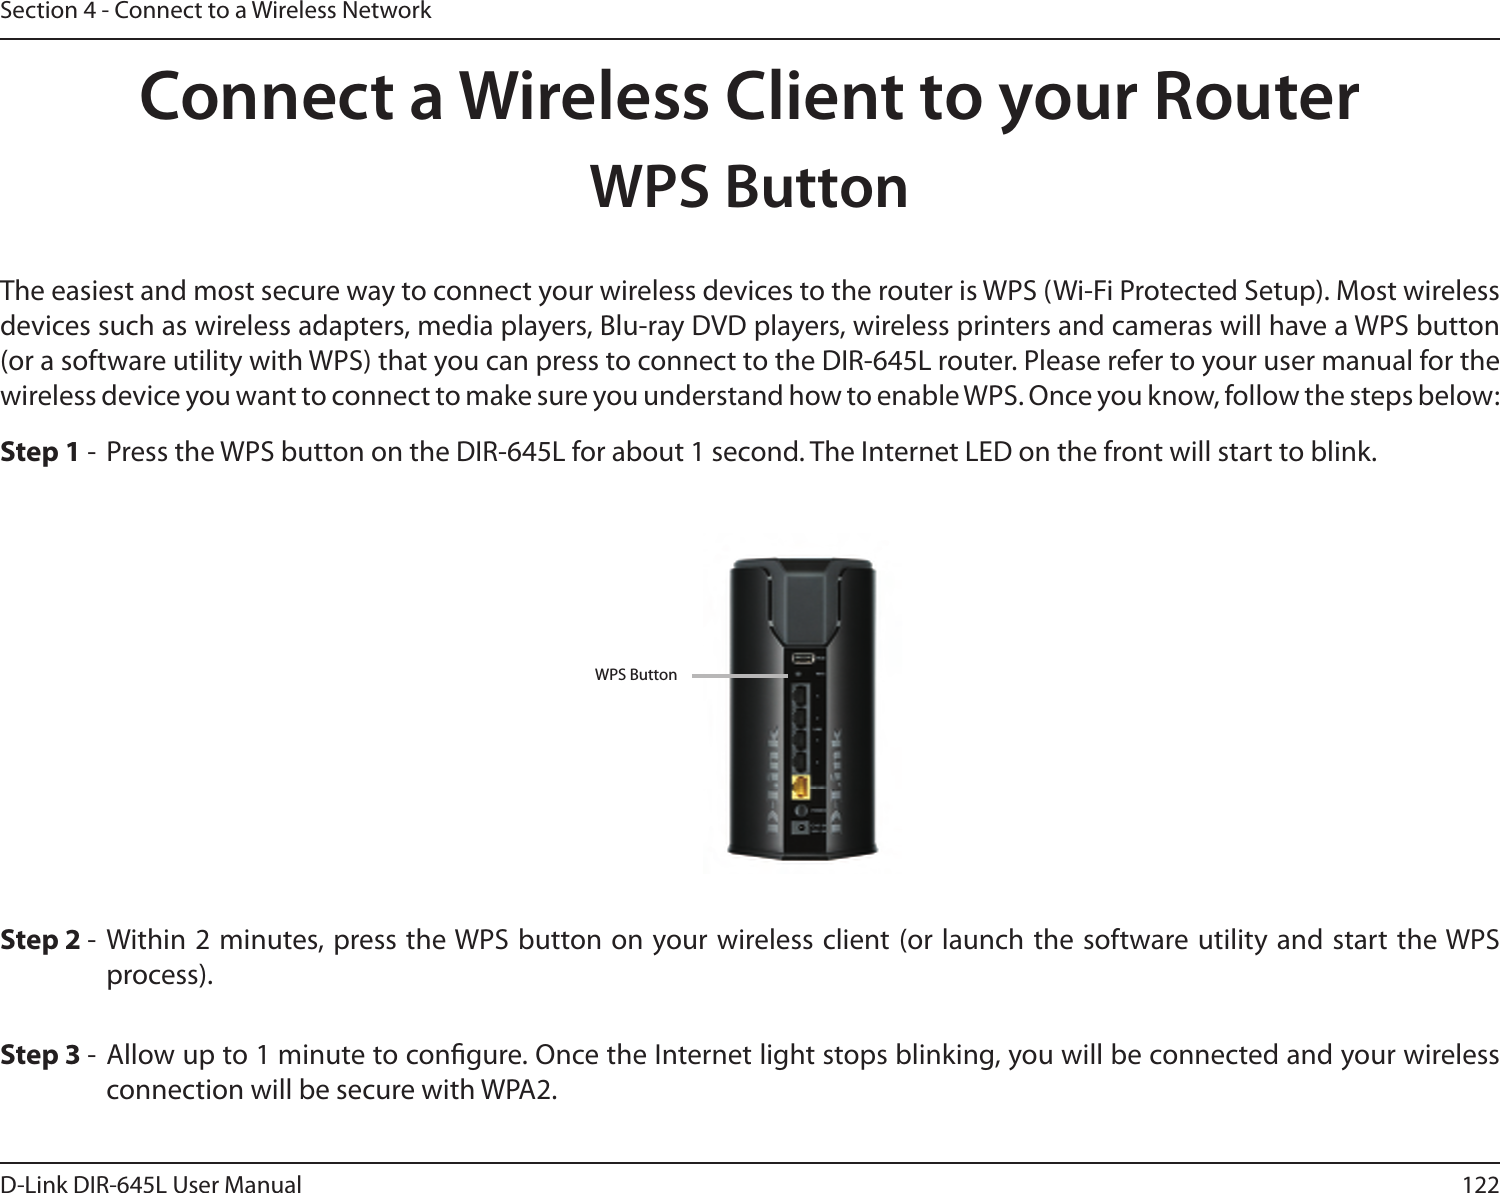 122D-Link DIR-645L User ManualSection 4 - Connect to a Wireless NetworkConnect a Wireless Client to your RouterWPS ButtonStep 2 -  Within 2 minutes, press the WPS button on your wireless client (or launch the software utility and start the WPS process).The easiest and most secure way to connect your wireless devices to the router is WPS (Wi-Fi Protected Setup). Most wireless devices such as wireless adapters, media players, Blu-ray DVD players, wireless printers and cameras will have a WPS button (or a software utility with WPS) that you can press to connect to the DIR-645L router. Please refer to your user manual for the wireless device you want to connect to make sure you understand how to enable WPS. Once you know, follow the steps below:Step 1 -  Press the WPS button on the DIR-645L for about 1 second. The Internet LED on the front will start to blink.Step 3 -  Allow up to 1 minute to congure. Once the Internet light stops blinking, you will be connected and your wireless connection will be secure with WPA2.WPS Button